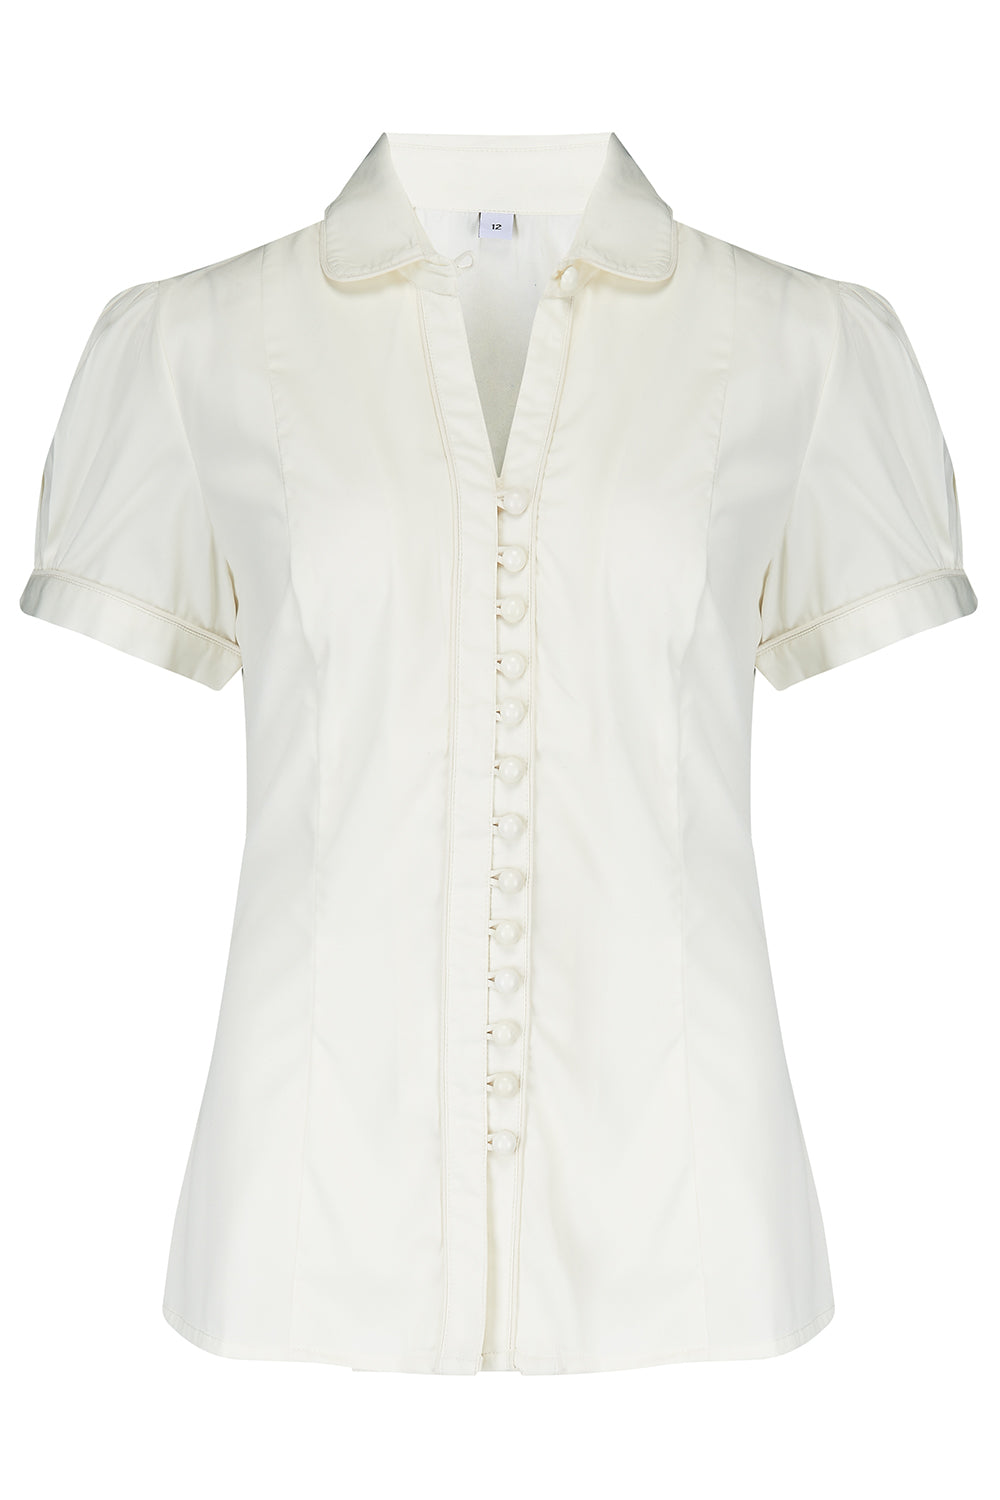 The "Margot" Blouse in Antique White, True & Classic Easy To Wear Vintage Style - True and authentic vintage style clothing, inspired by the Classic styles of CC41 , WW2 and the fun 1950s RocknRoll era, for everyday wear plus events like Goodwood Revival, Twinwood Festival and Viva Las Vegas Rockabilly Weekend Rock n Romance Rock n Romance